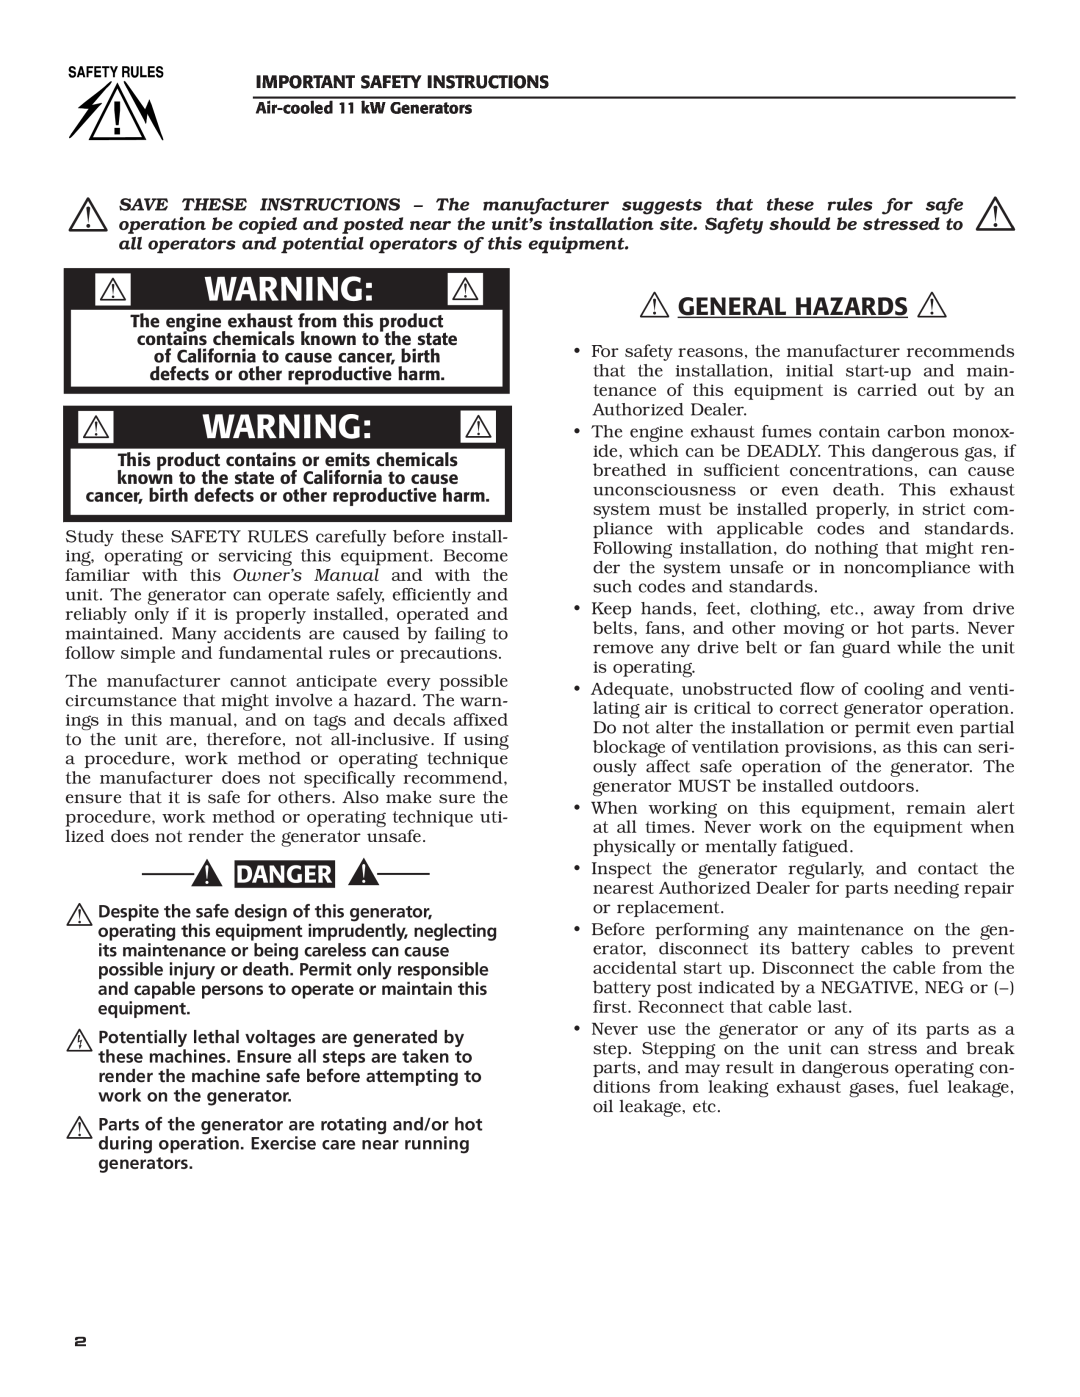 Generac Power Systems 004916-0 owner manual  General Hazards ,  Warning , Danger, Important Safety Instructions 